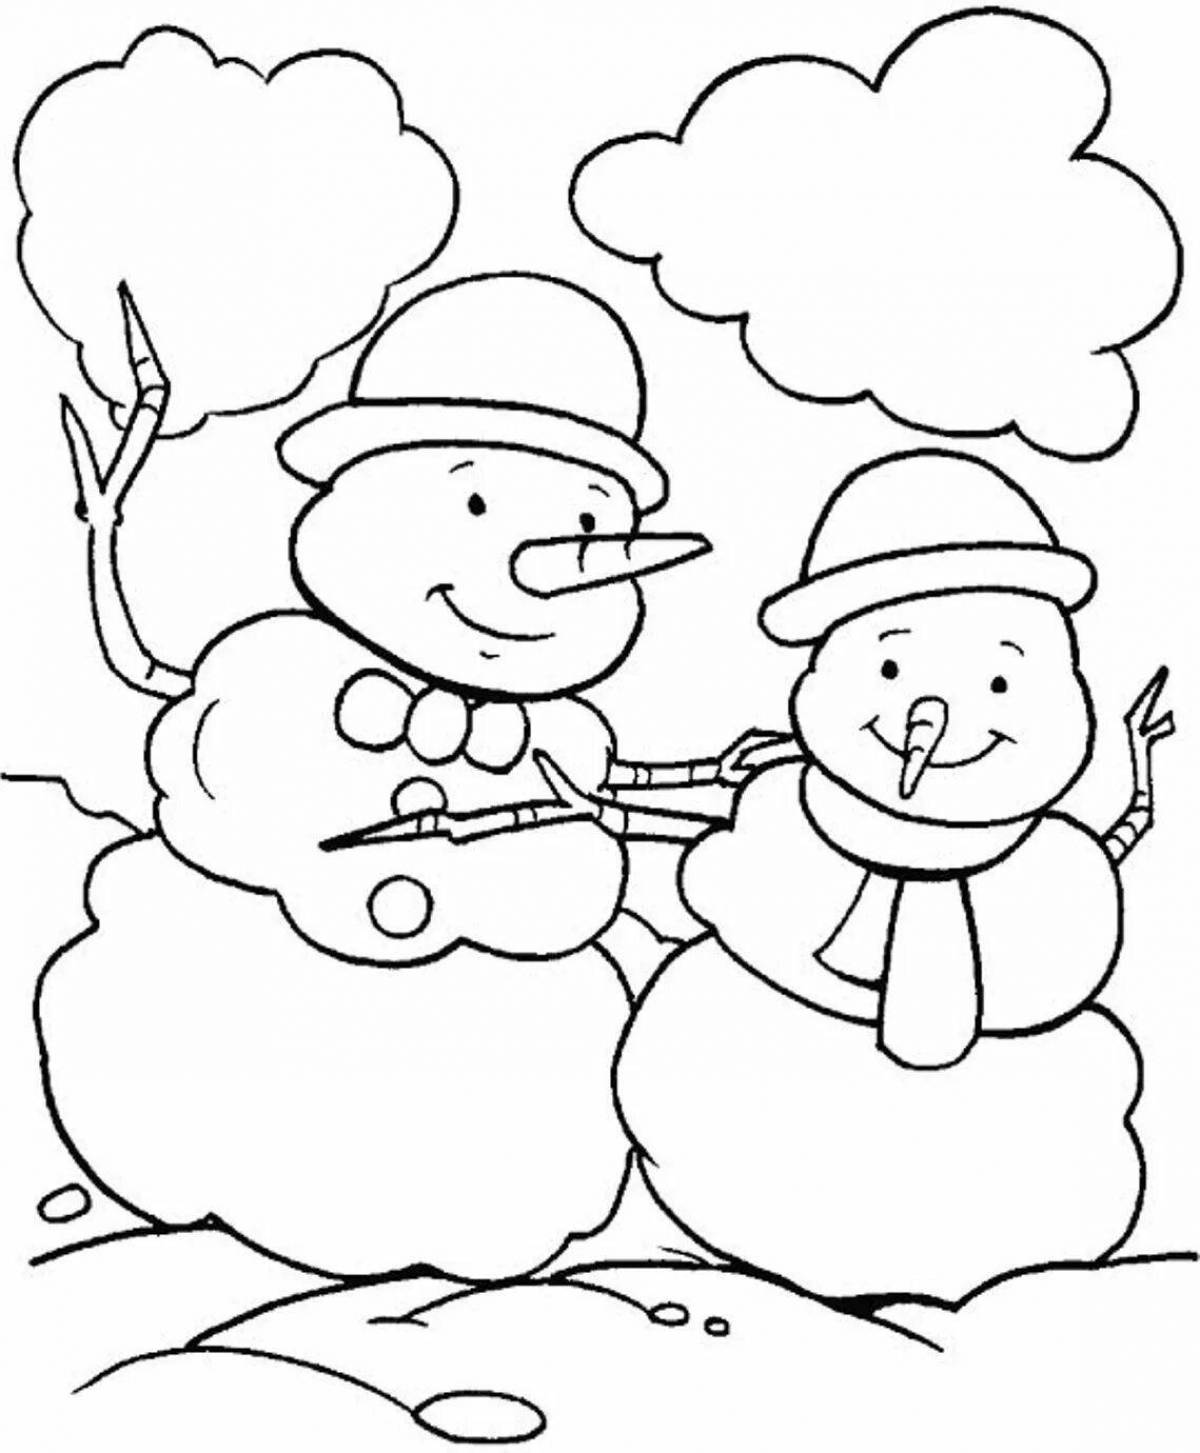 Magic winter coloring book for children 5 years old